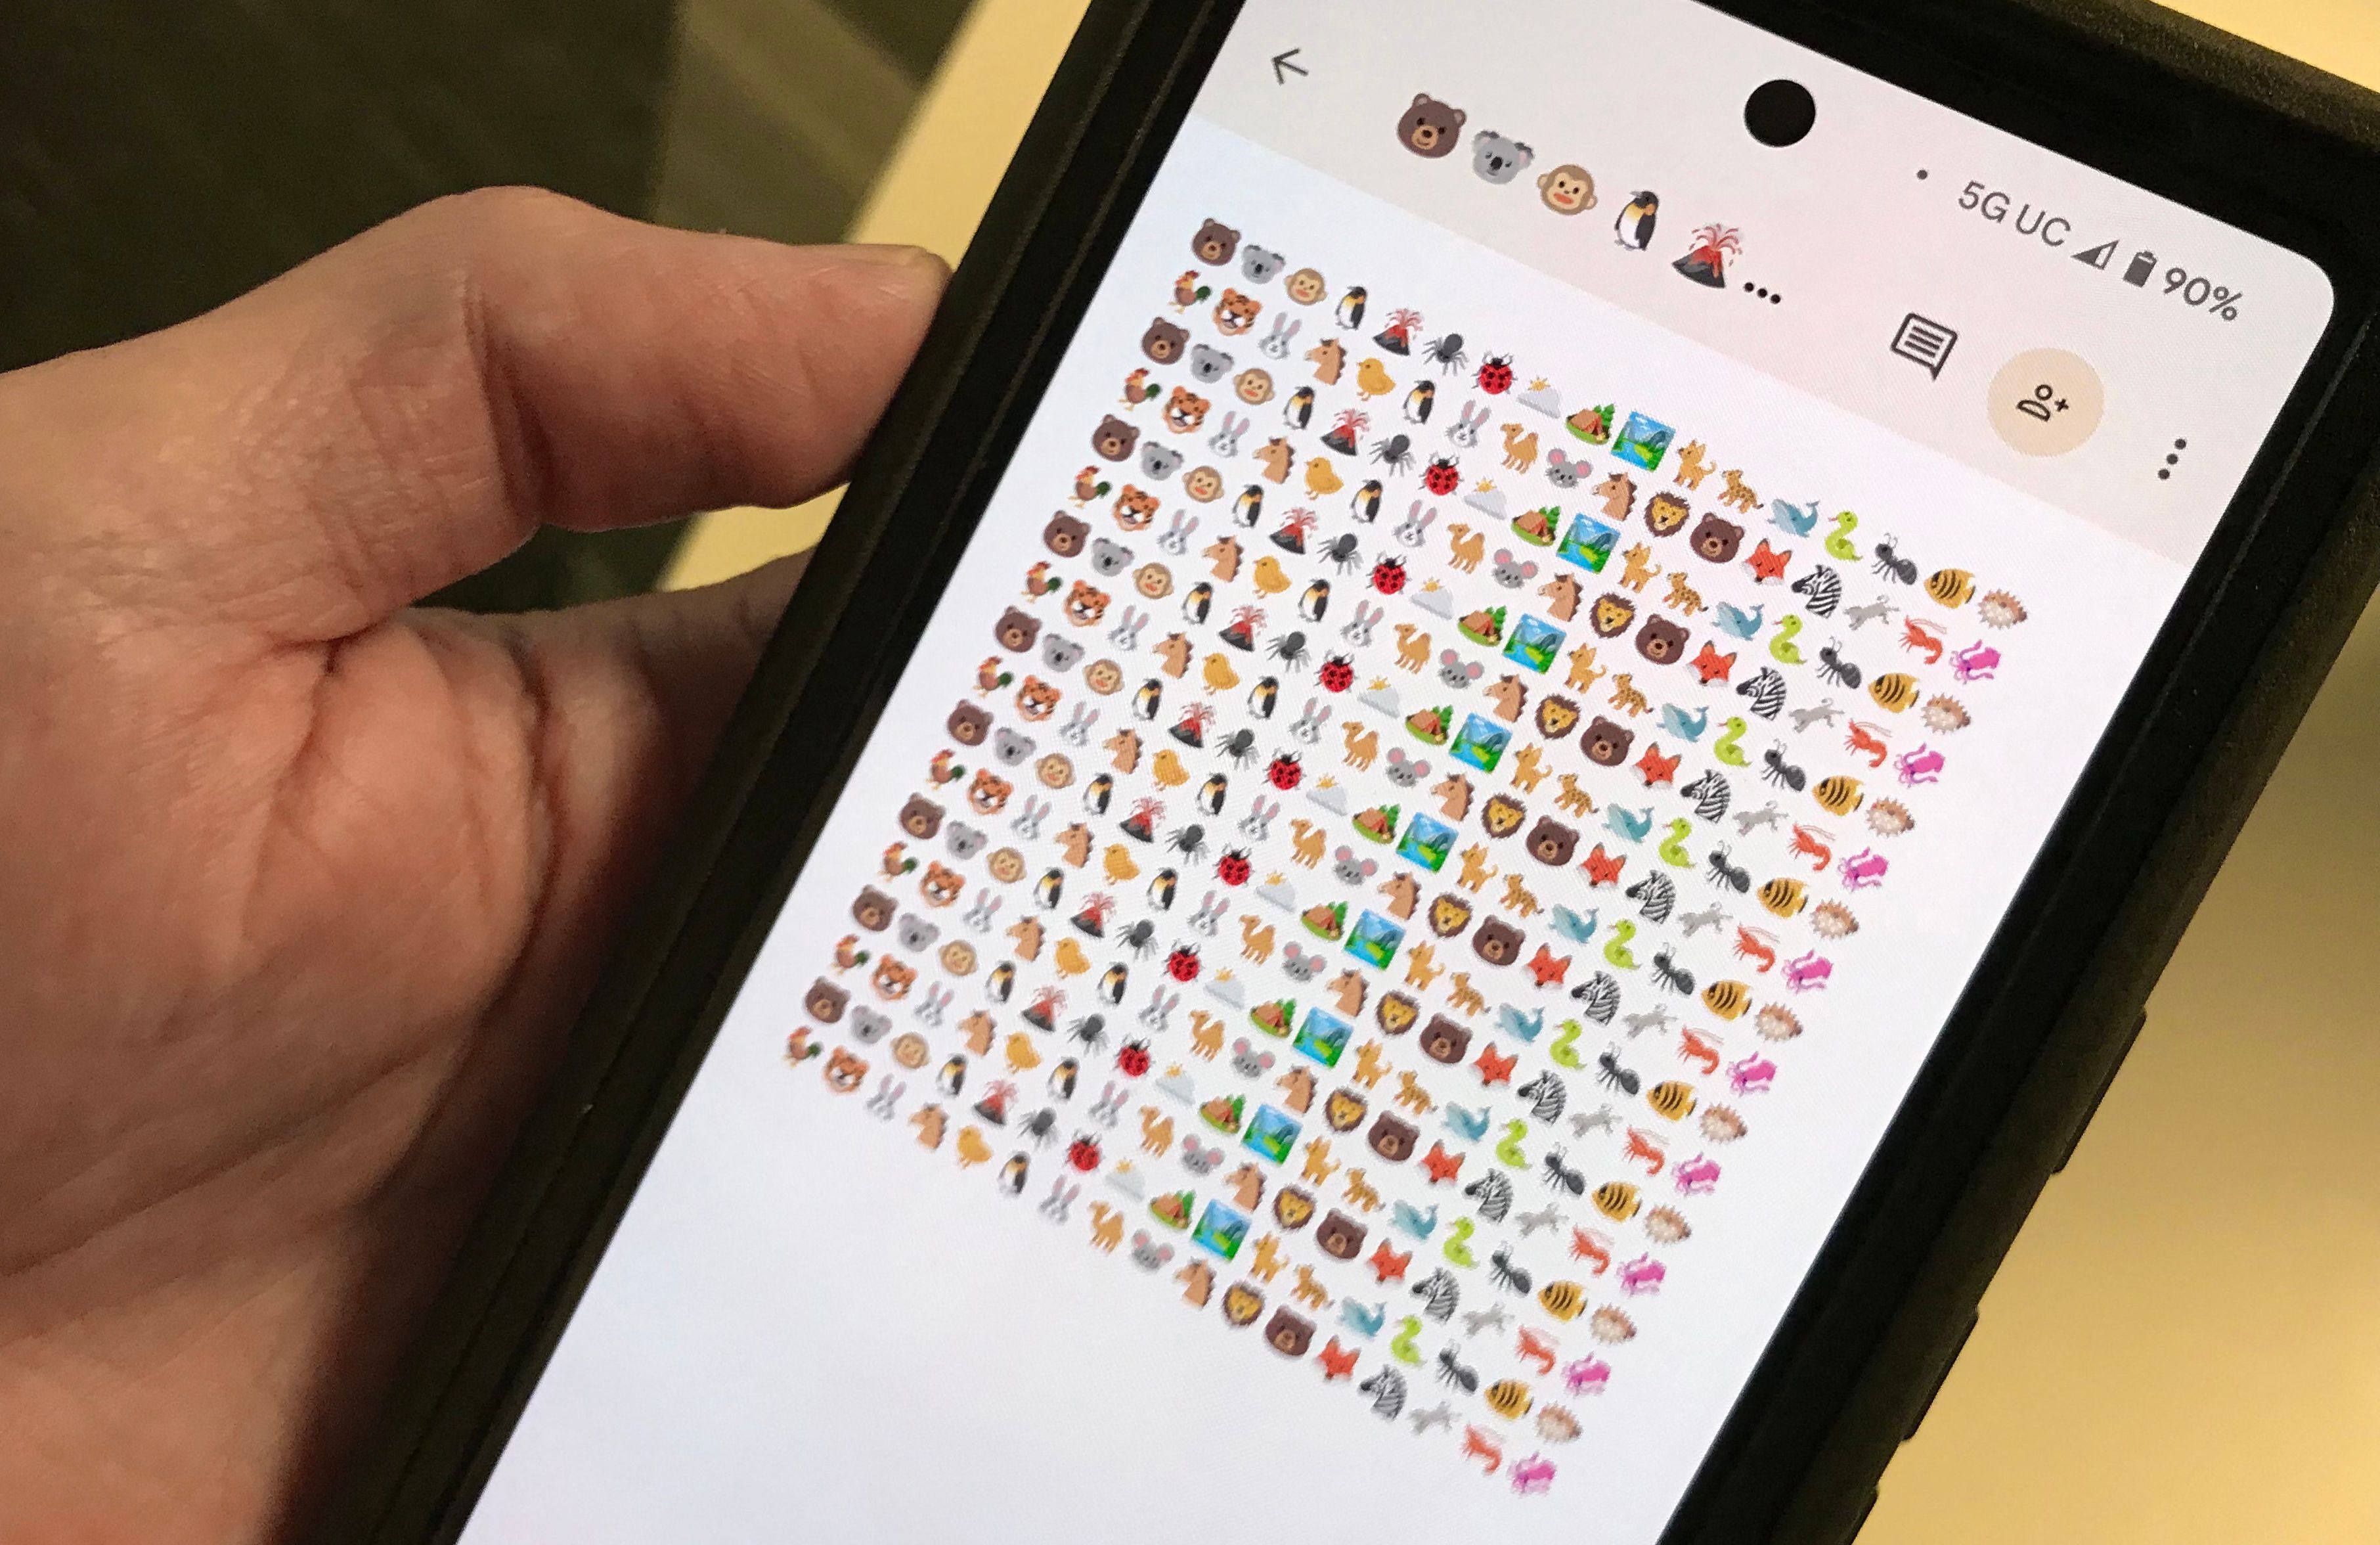 Emojis, ubiquitous in messaging, need more diversity when it comes to depicting animals plants, fungi and other organisms to help spread ideas and information over social media, scientists say. Photo: AFP